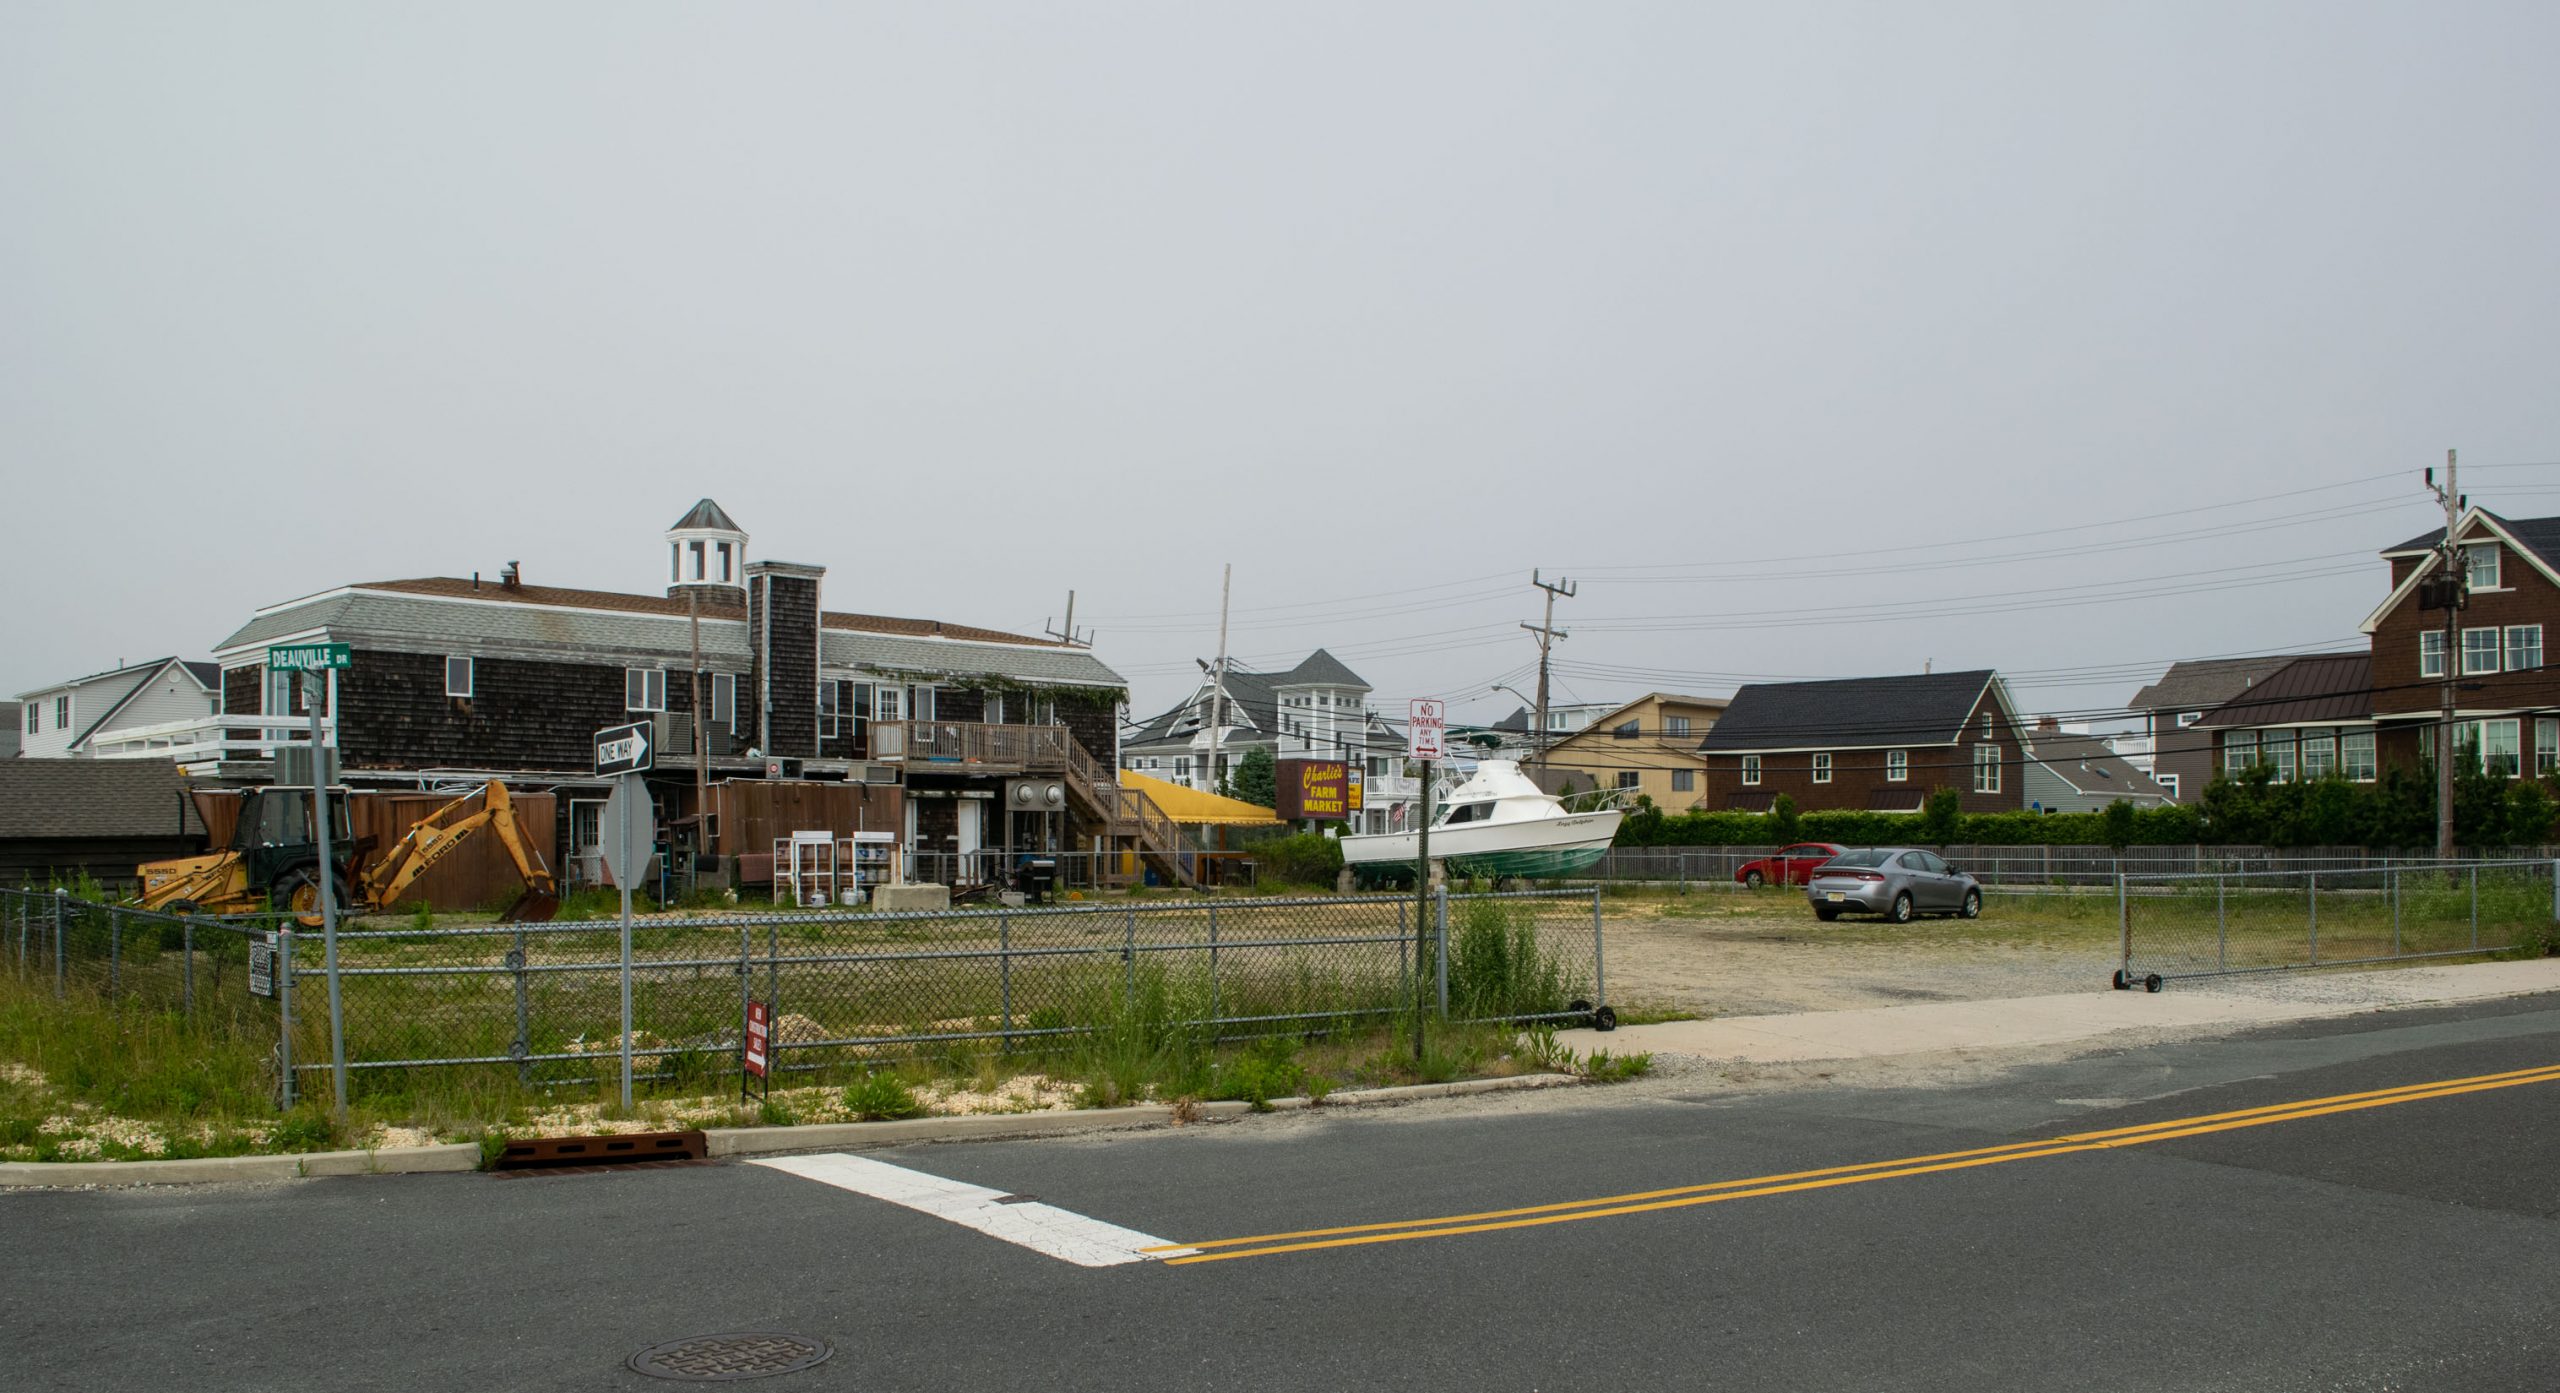 The Brick planning board approved the construction of three new homes along Route 35, June 2020. (Photo: Daniel Nee)